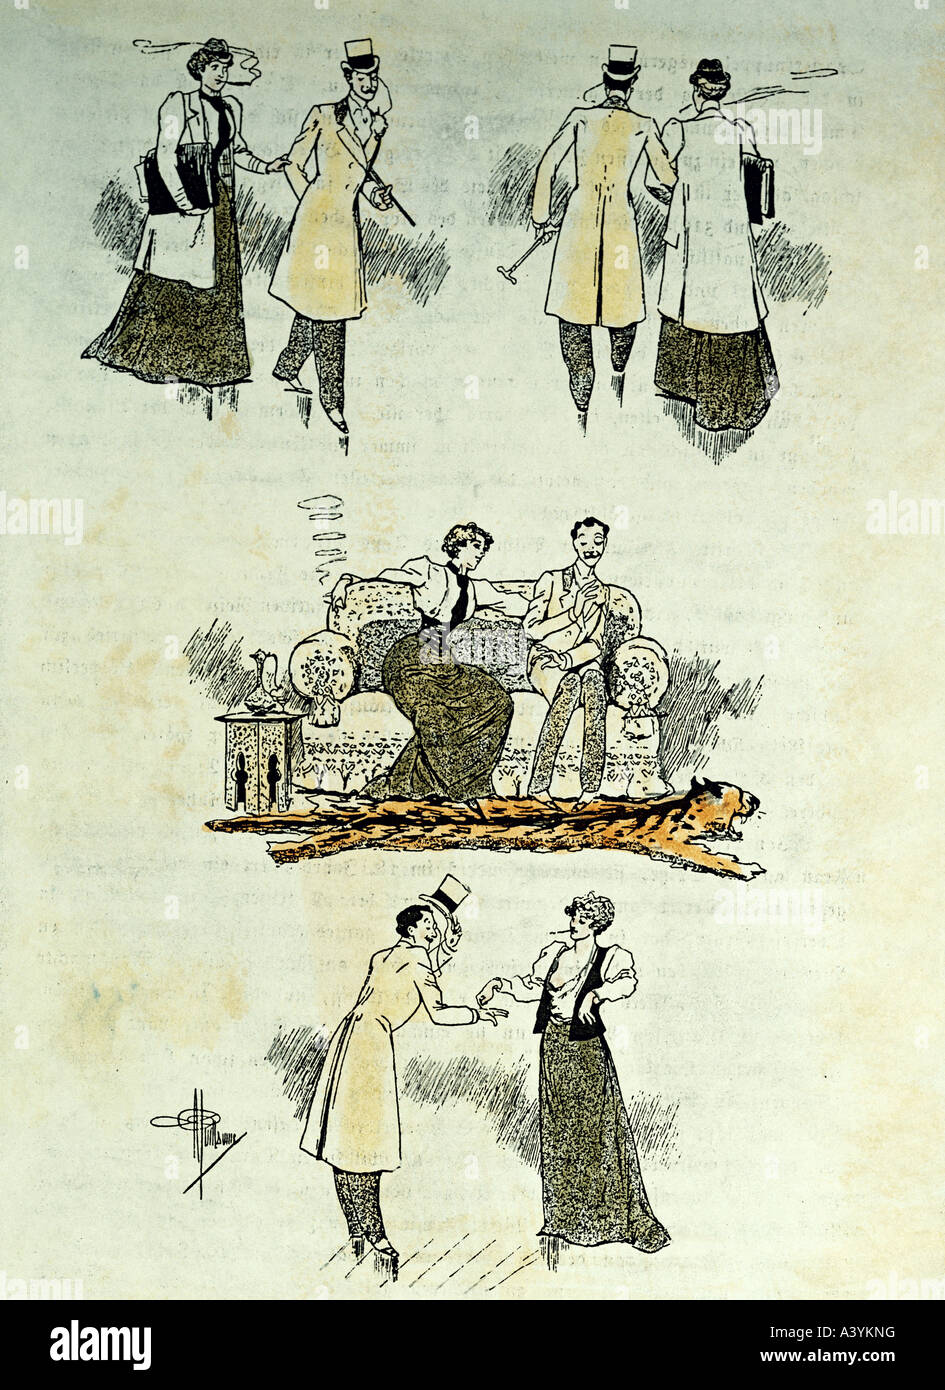 people, women, 20th century, 'emancipation today', colour lithograph, by Albert Guillaume (1873 - 1942), France, circa 1910, private collection, , Stock Photo